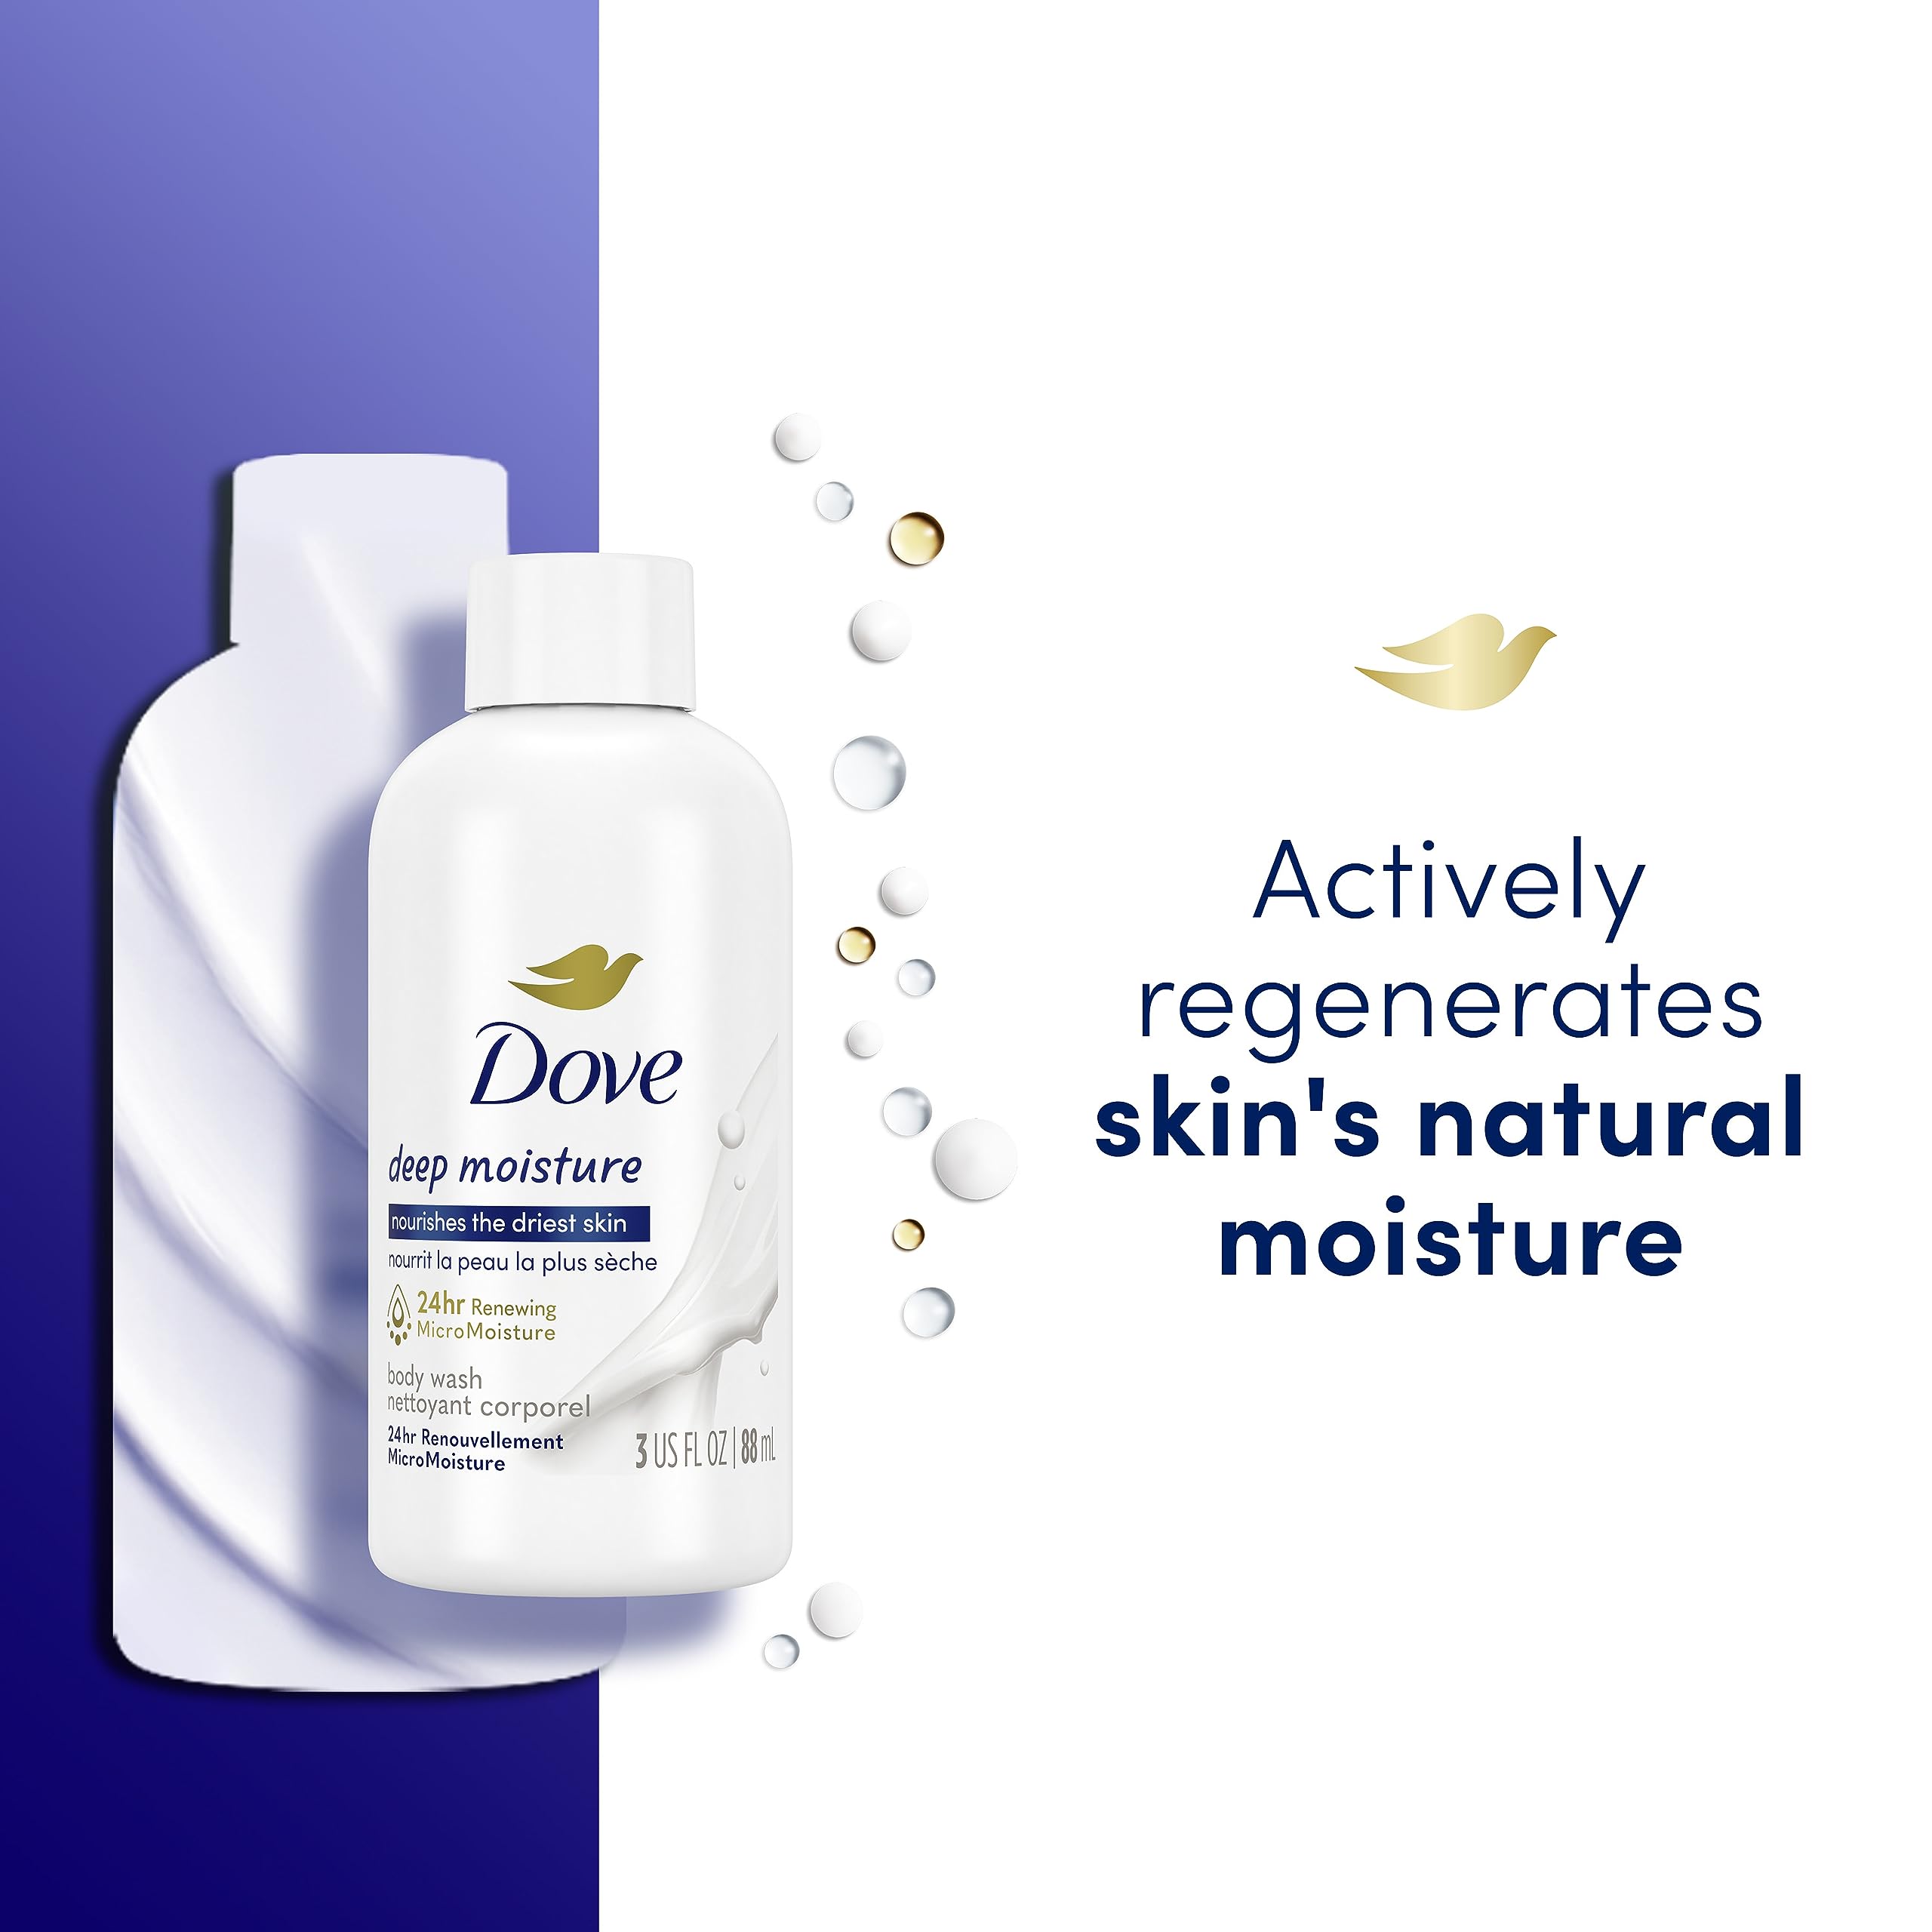 Dove Body Wash Deep Moisture for Dry Skin Body Wash with 24hr Renewing MicroMoisture Nourishes The Driest Skin 3 oz